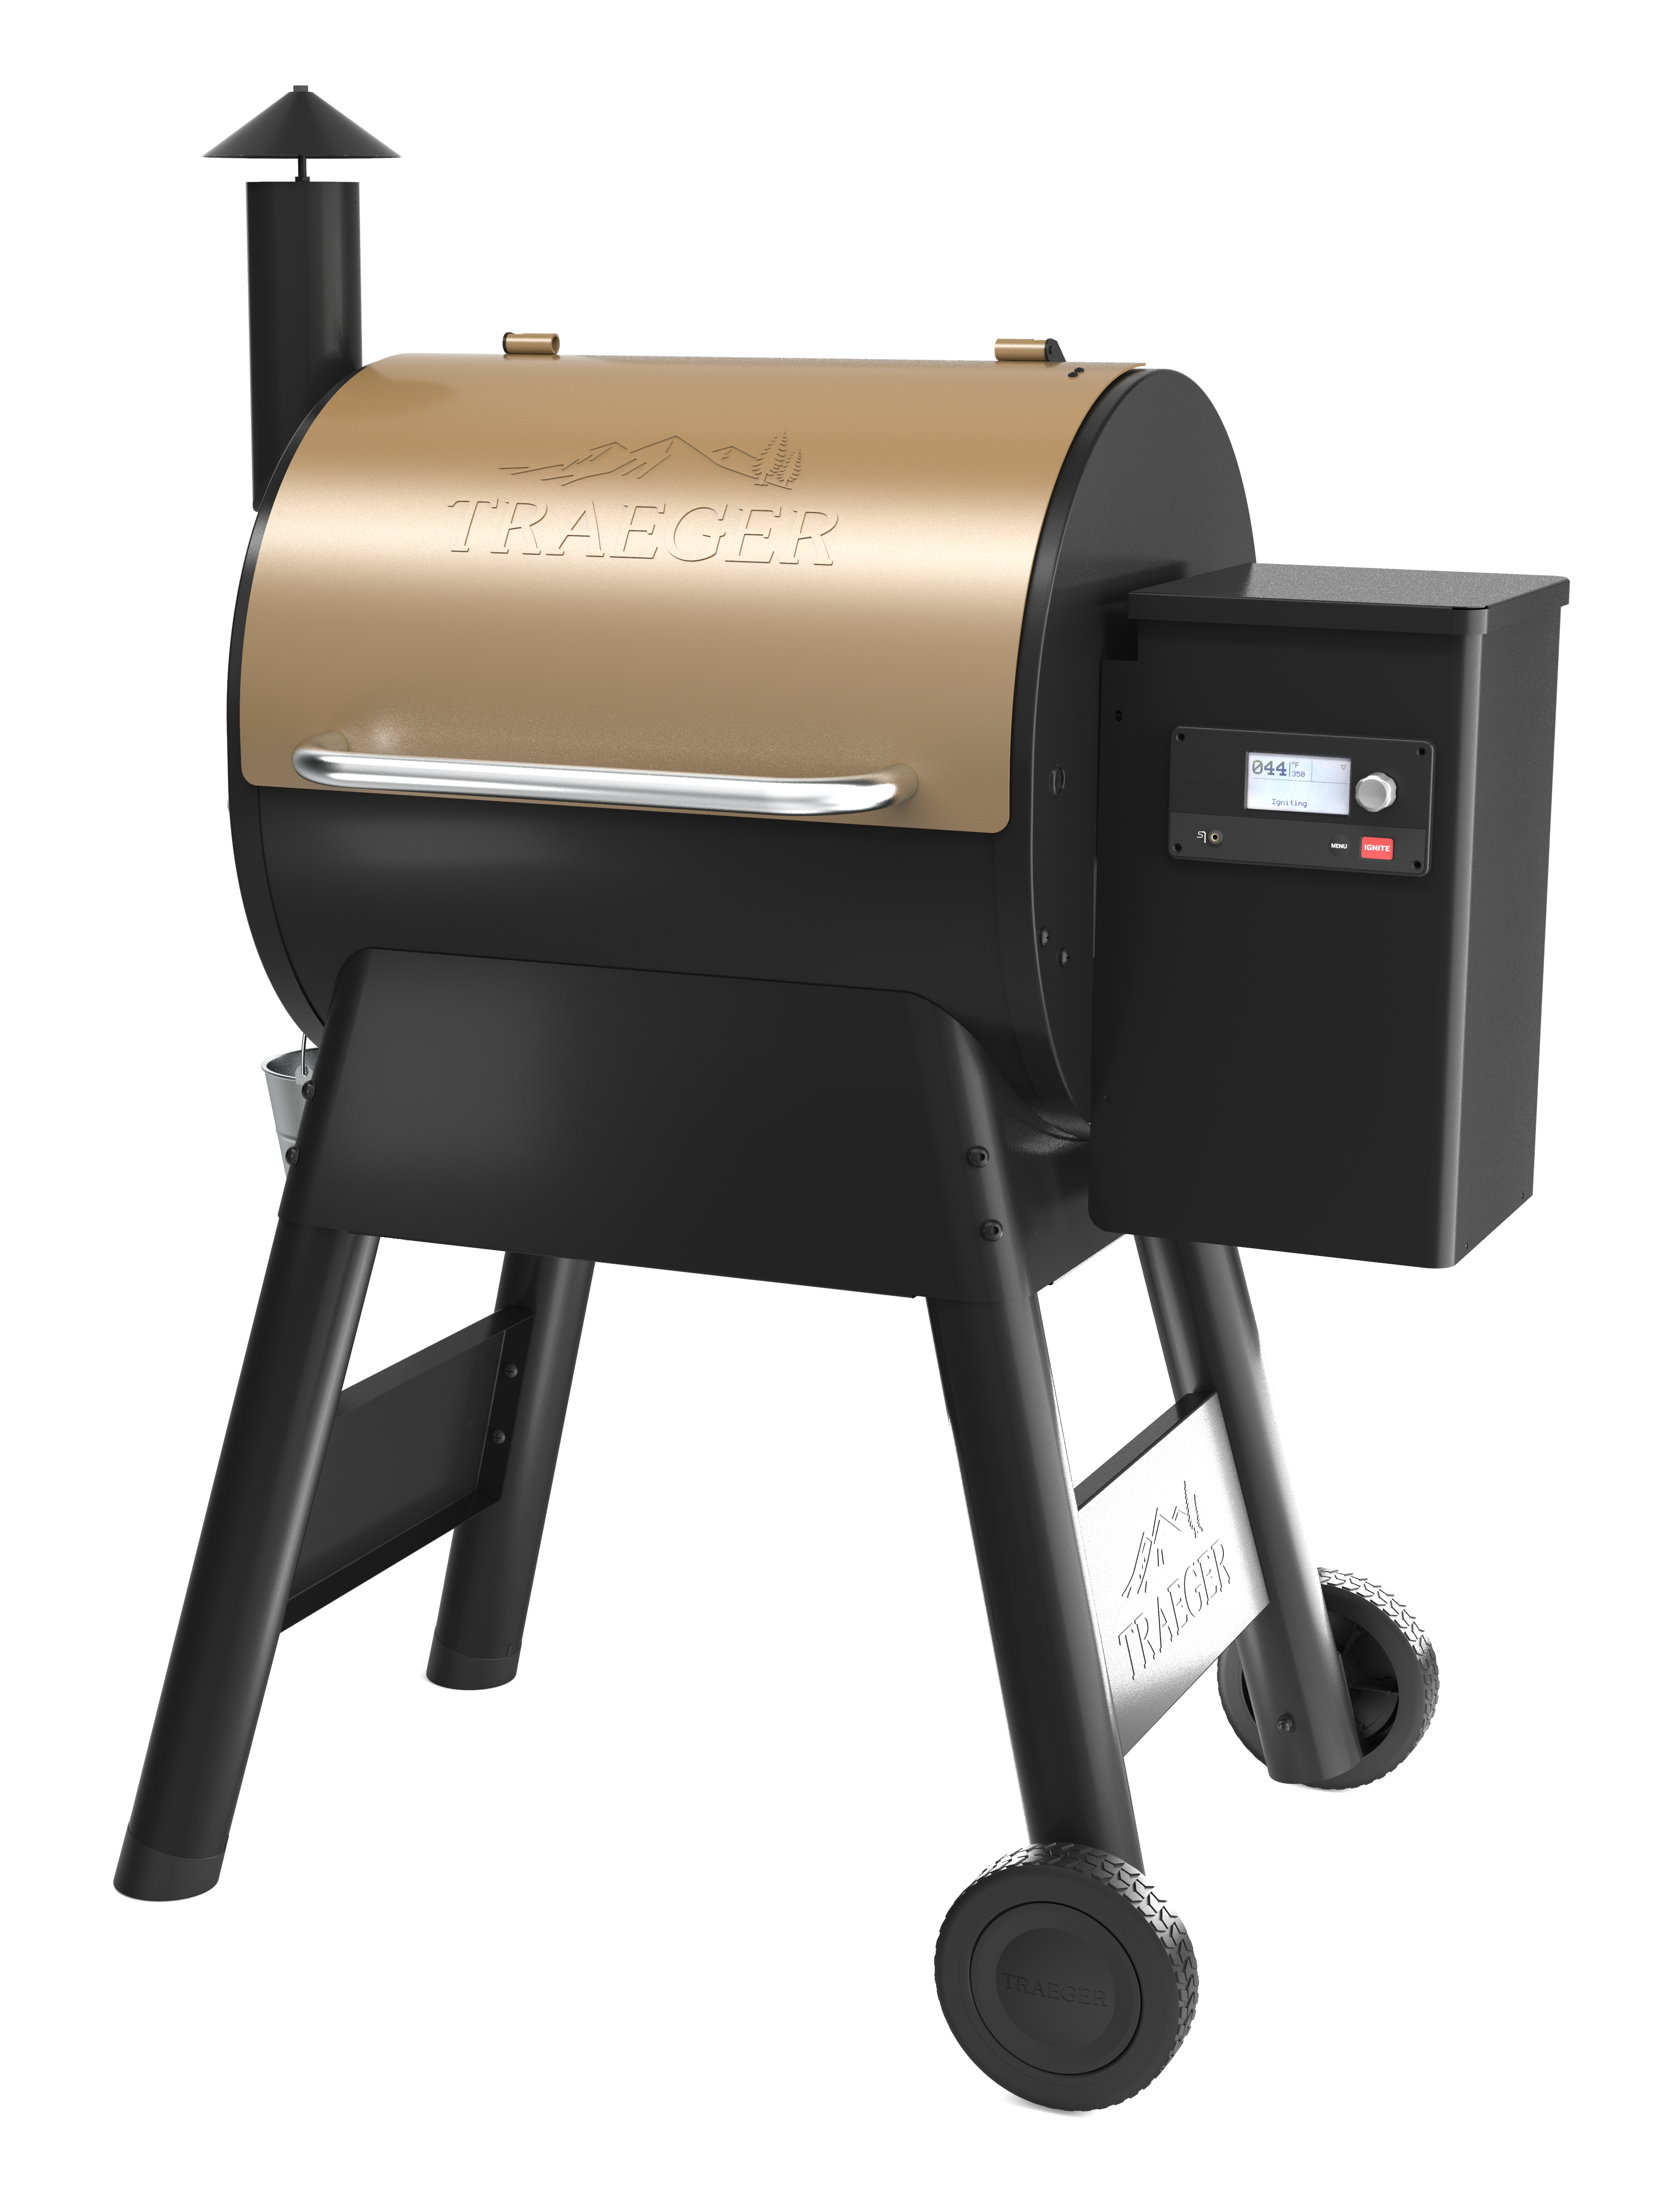 Traeger Pellet Grills Pro 575 Wood Pellet Grill and Smoker - Bronze - image 2 of 9